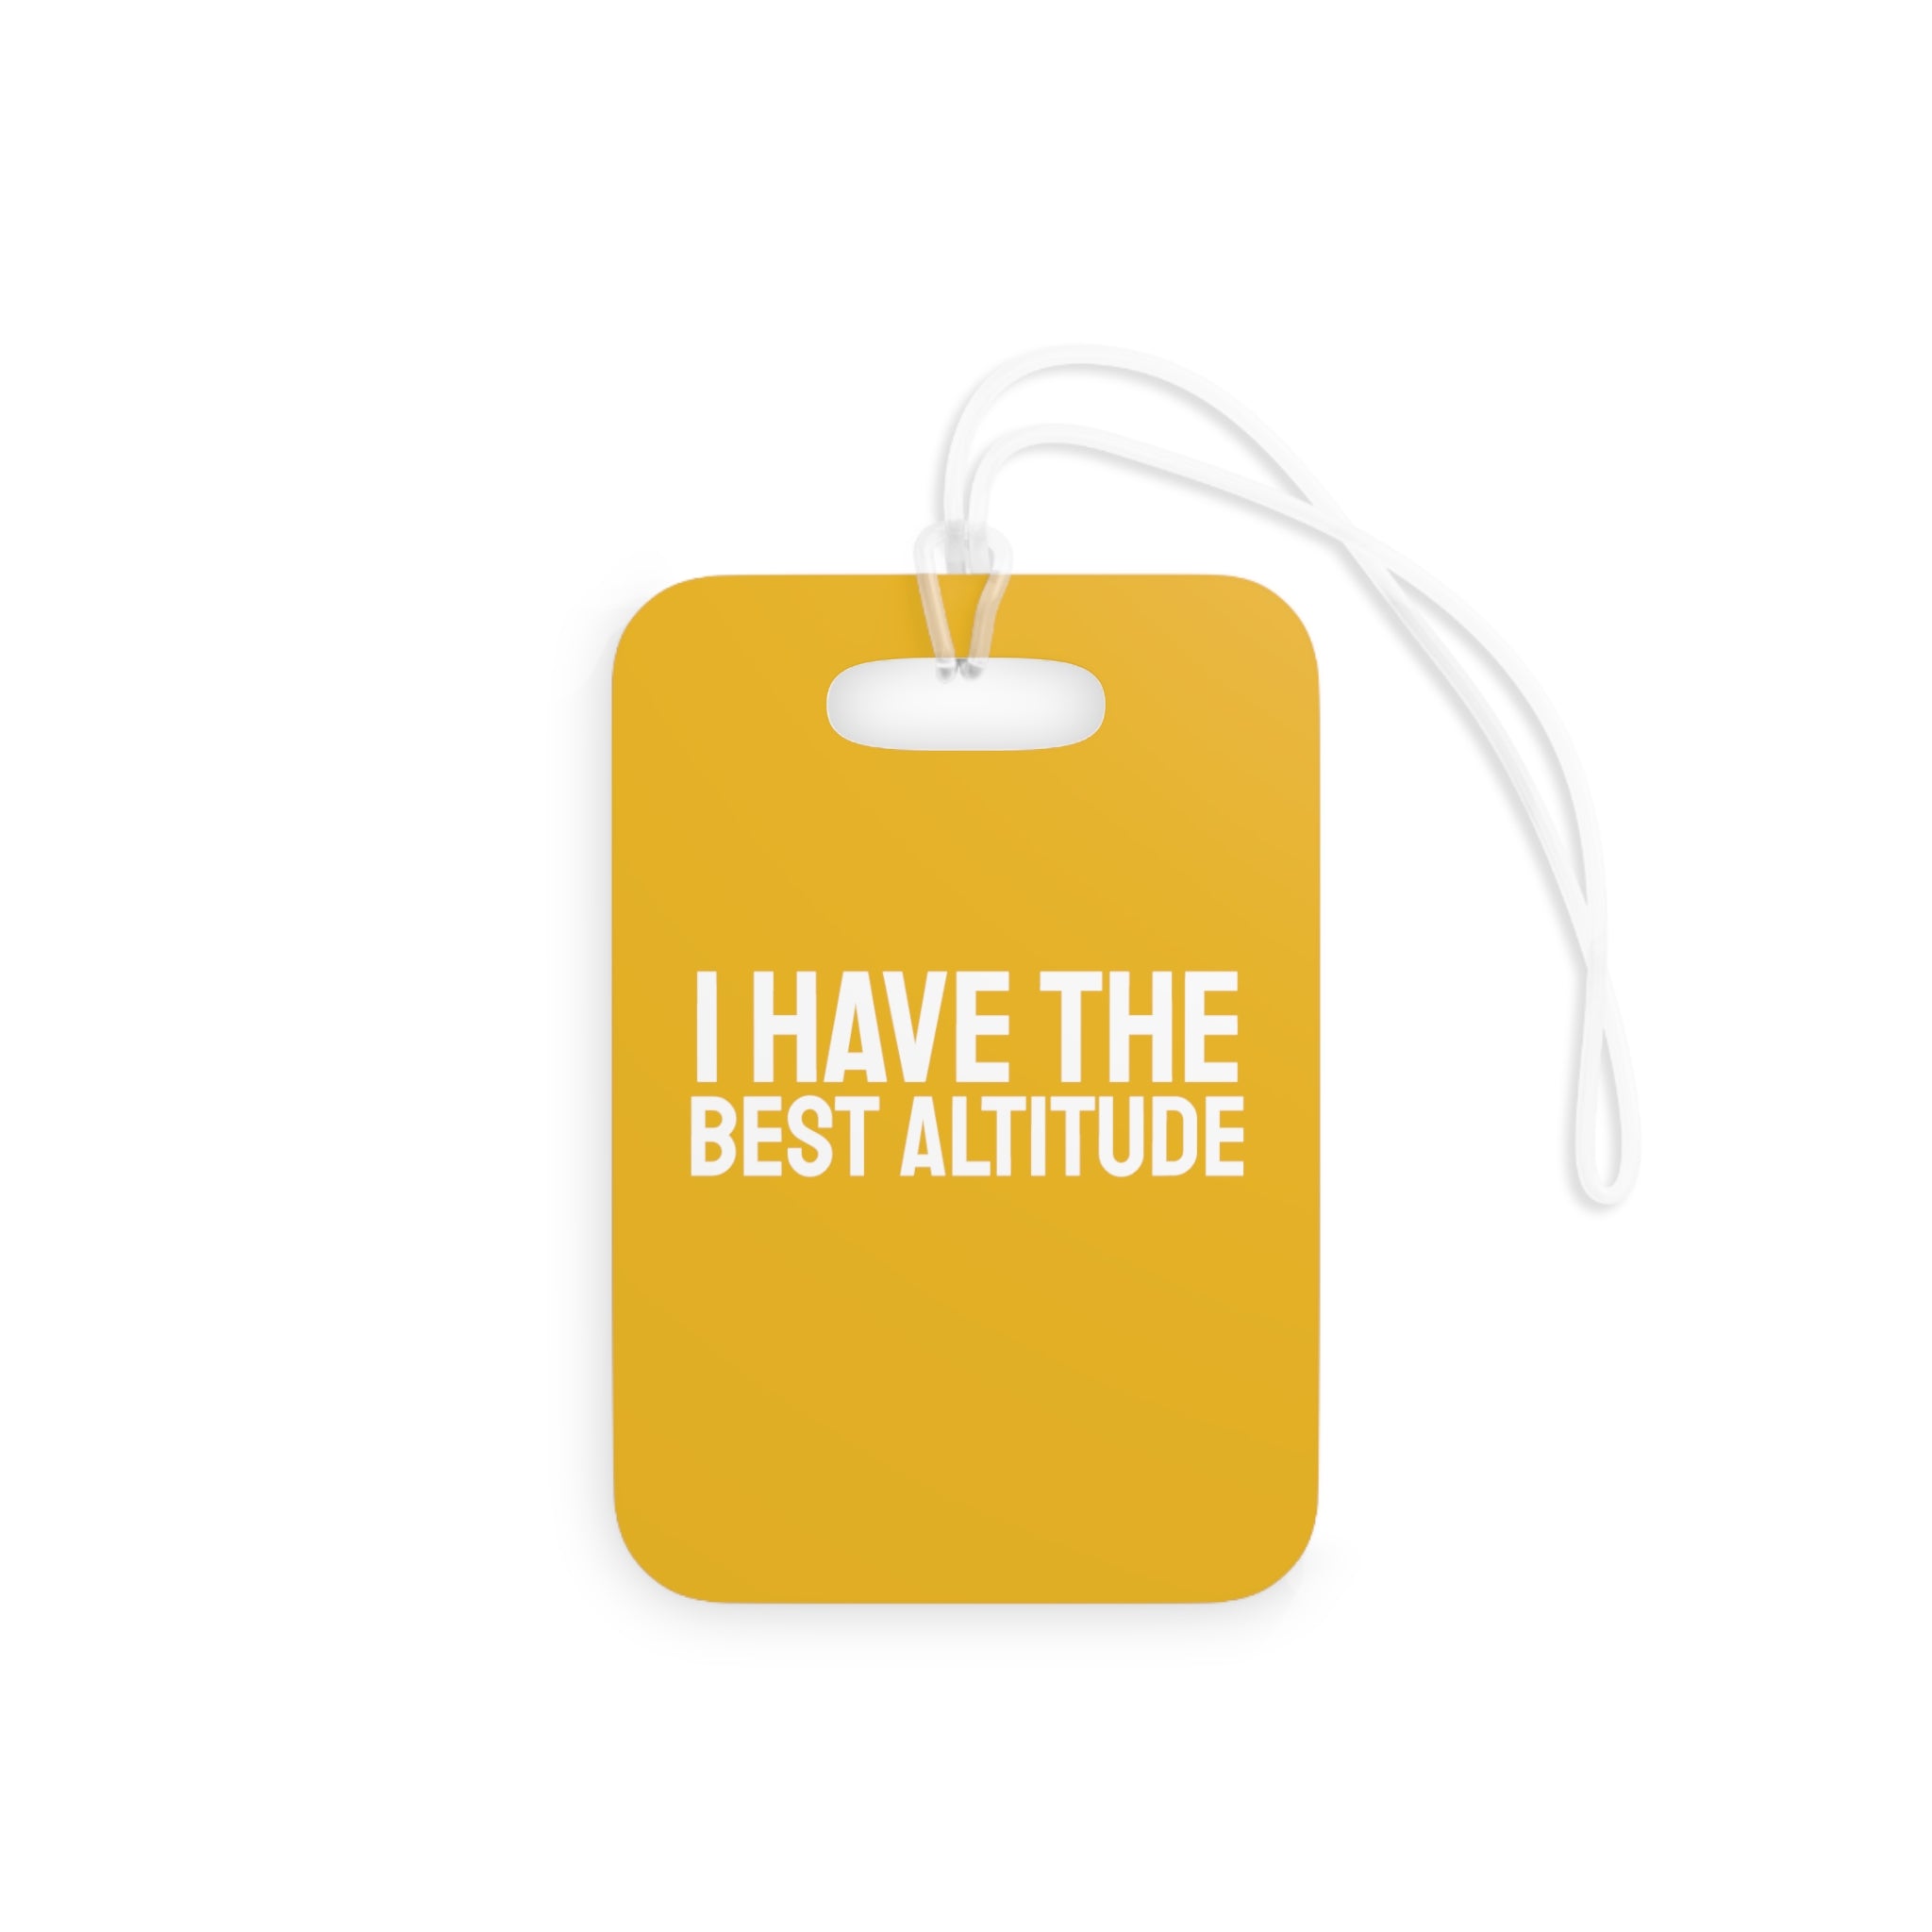 I have the best altitude Luggage Tag (Yellow)